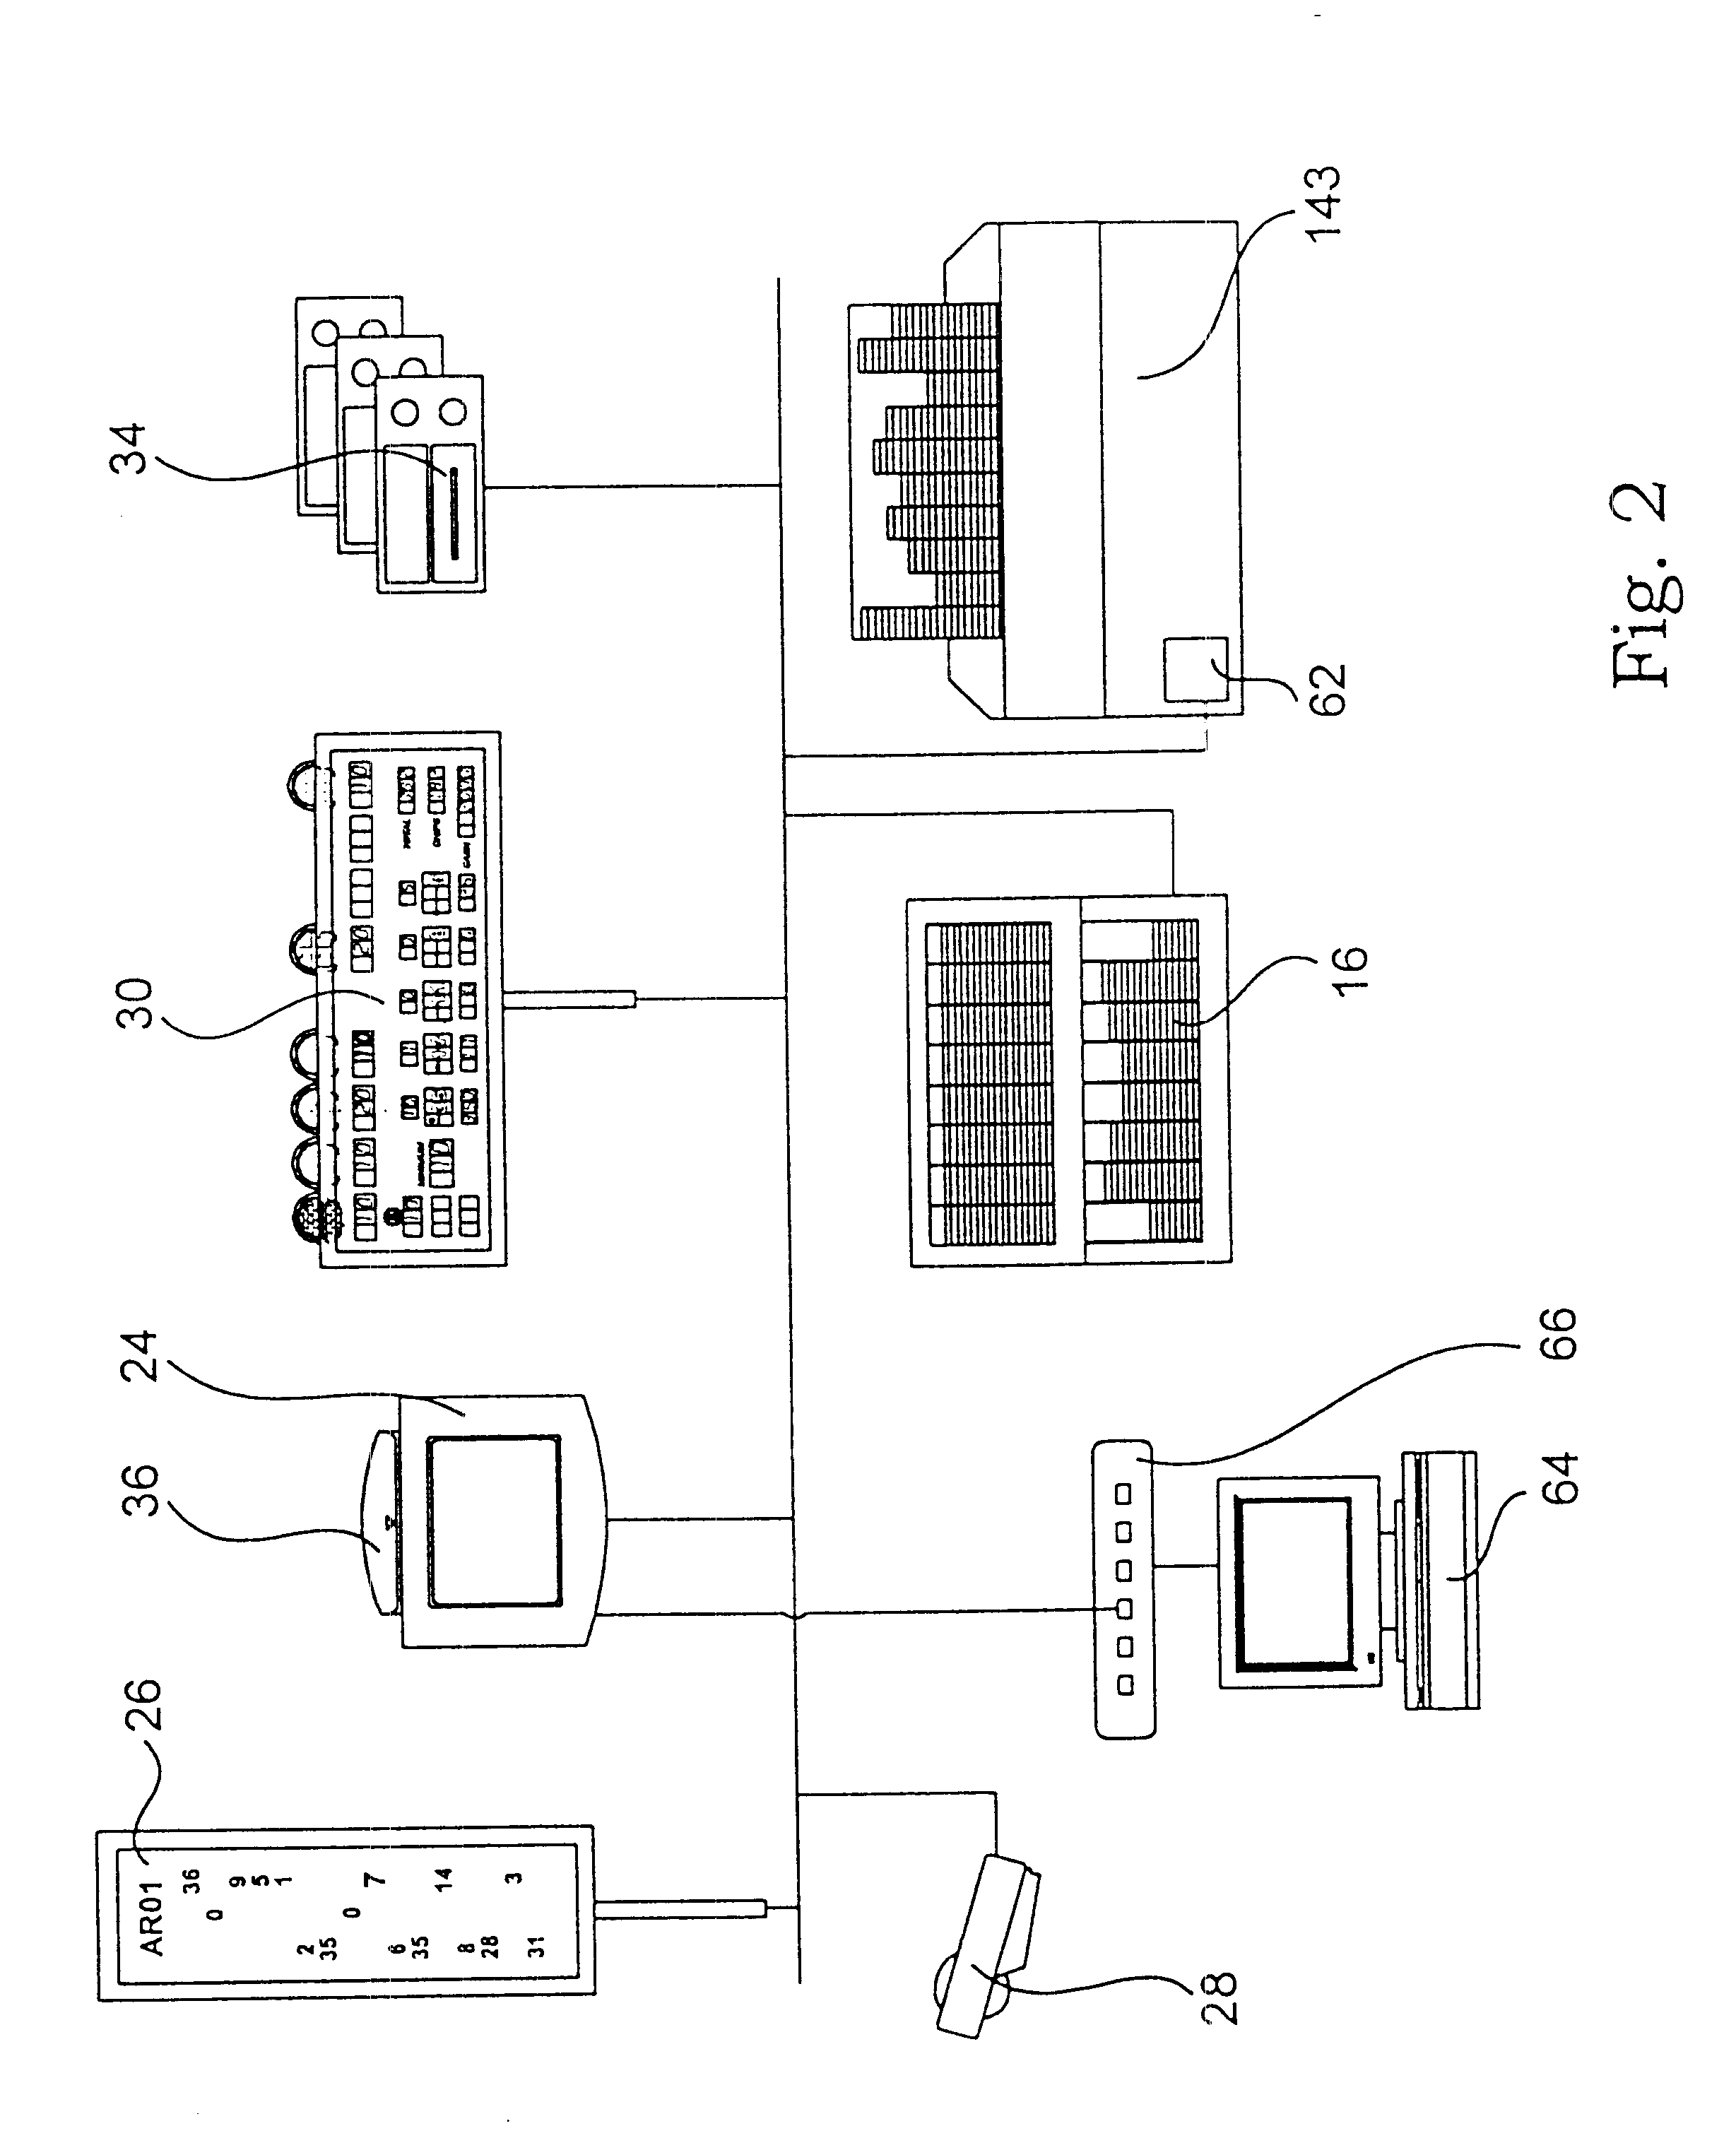 Method of estimating the performance of a croupier at a roulette table